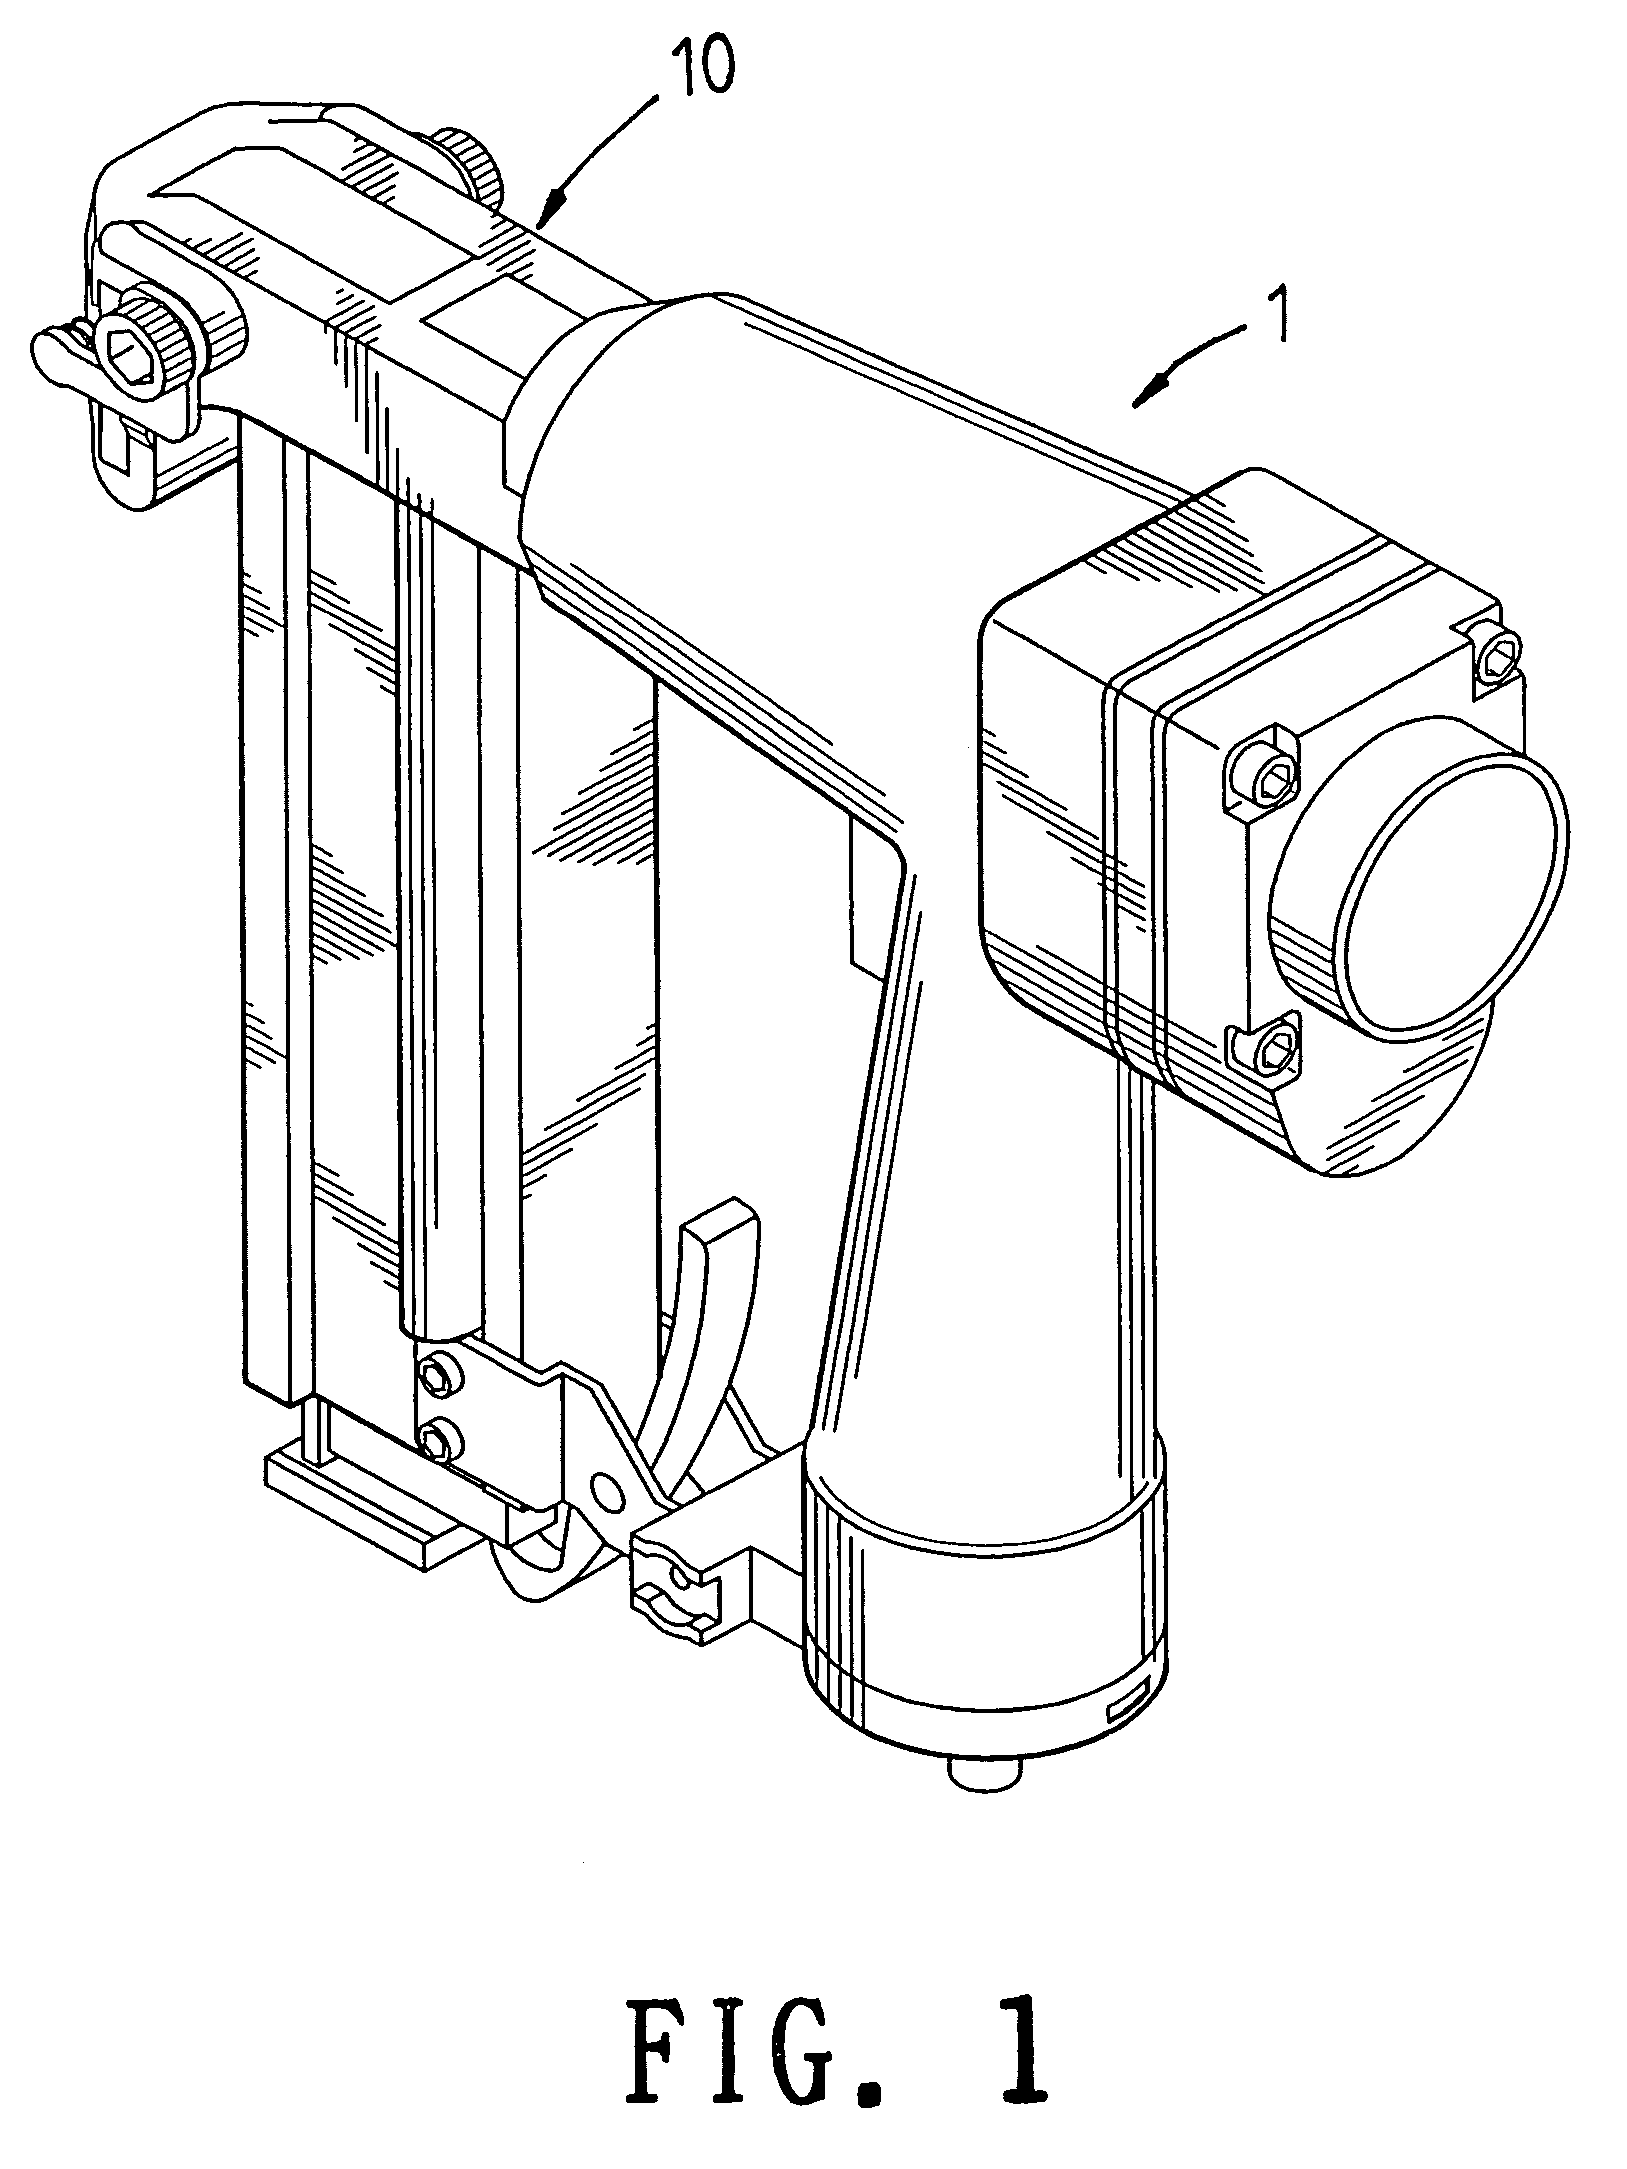 Positioning device of a nail driver